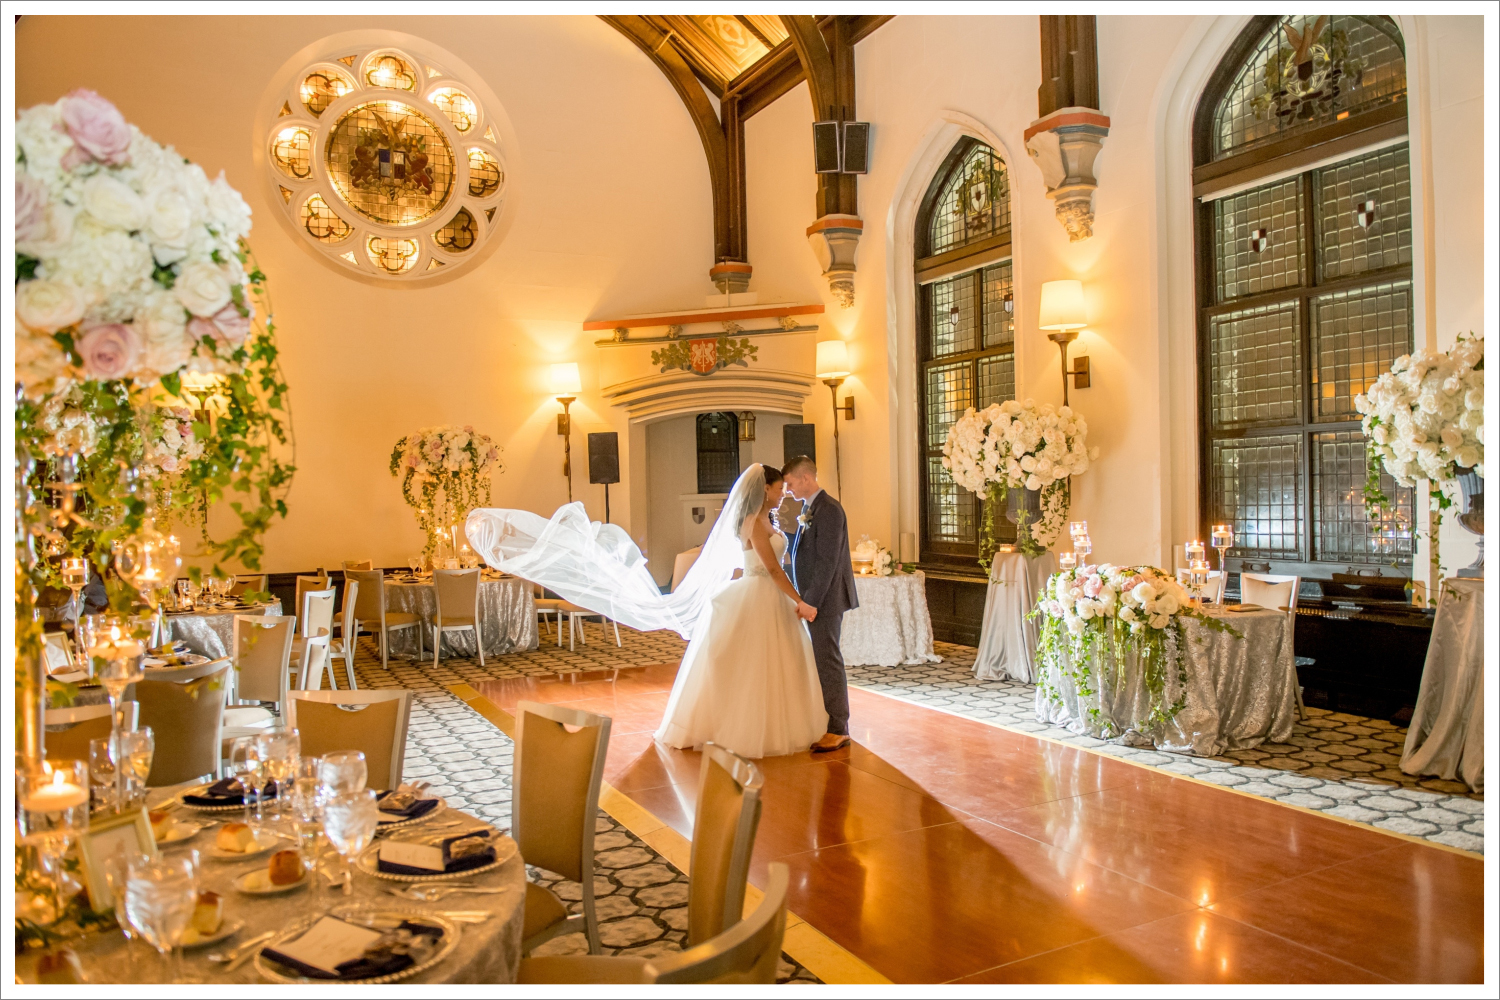 Stacey & Brian - Dreamy Wedding at Castle Hotel & Spa New York